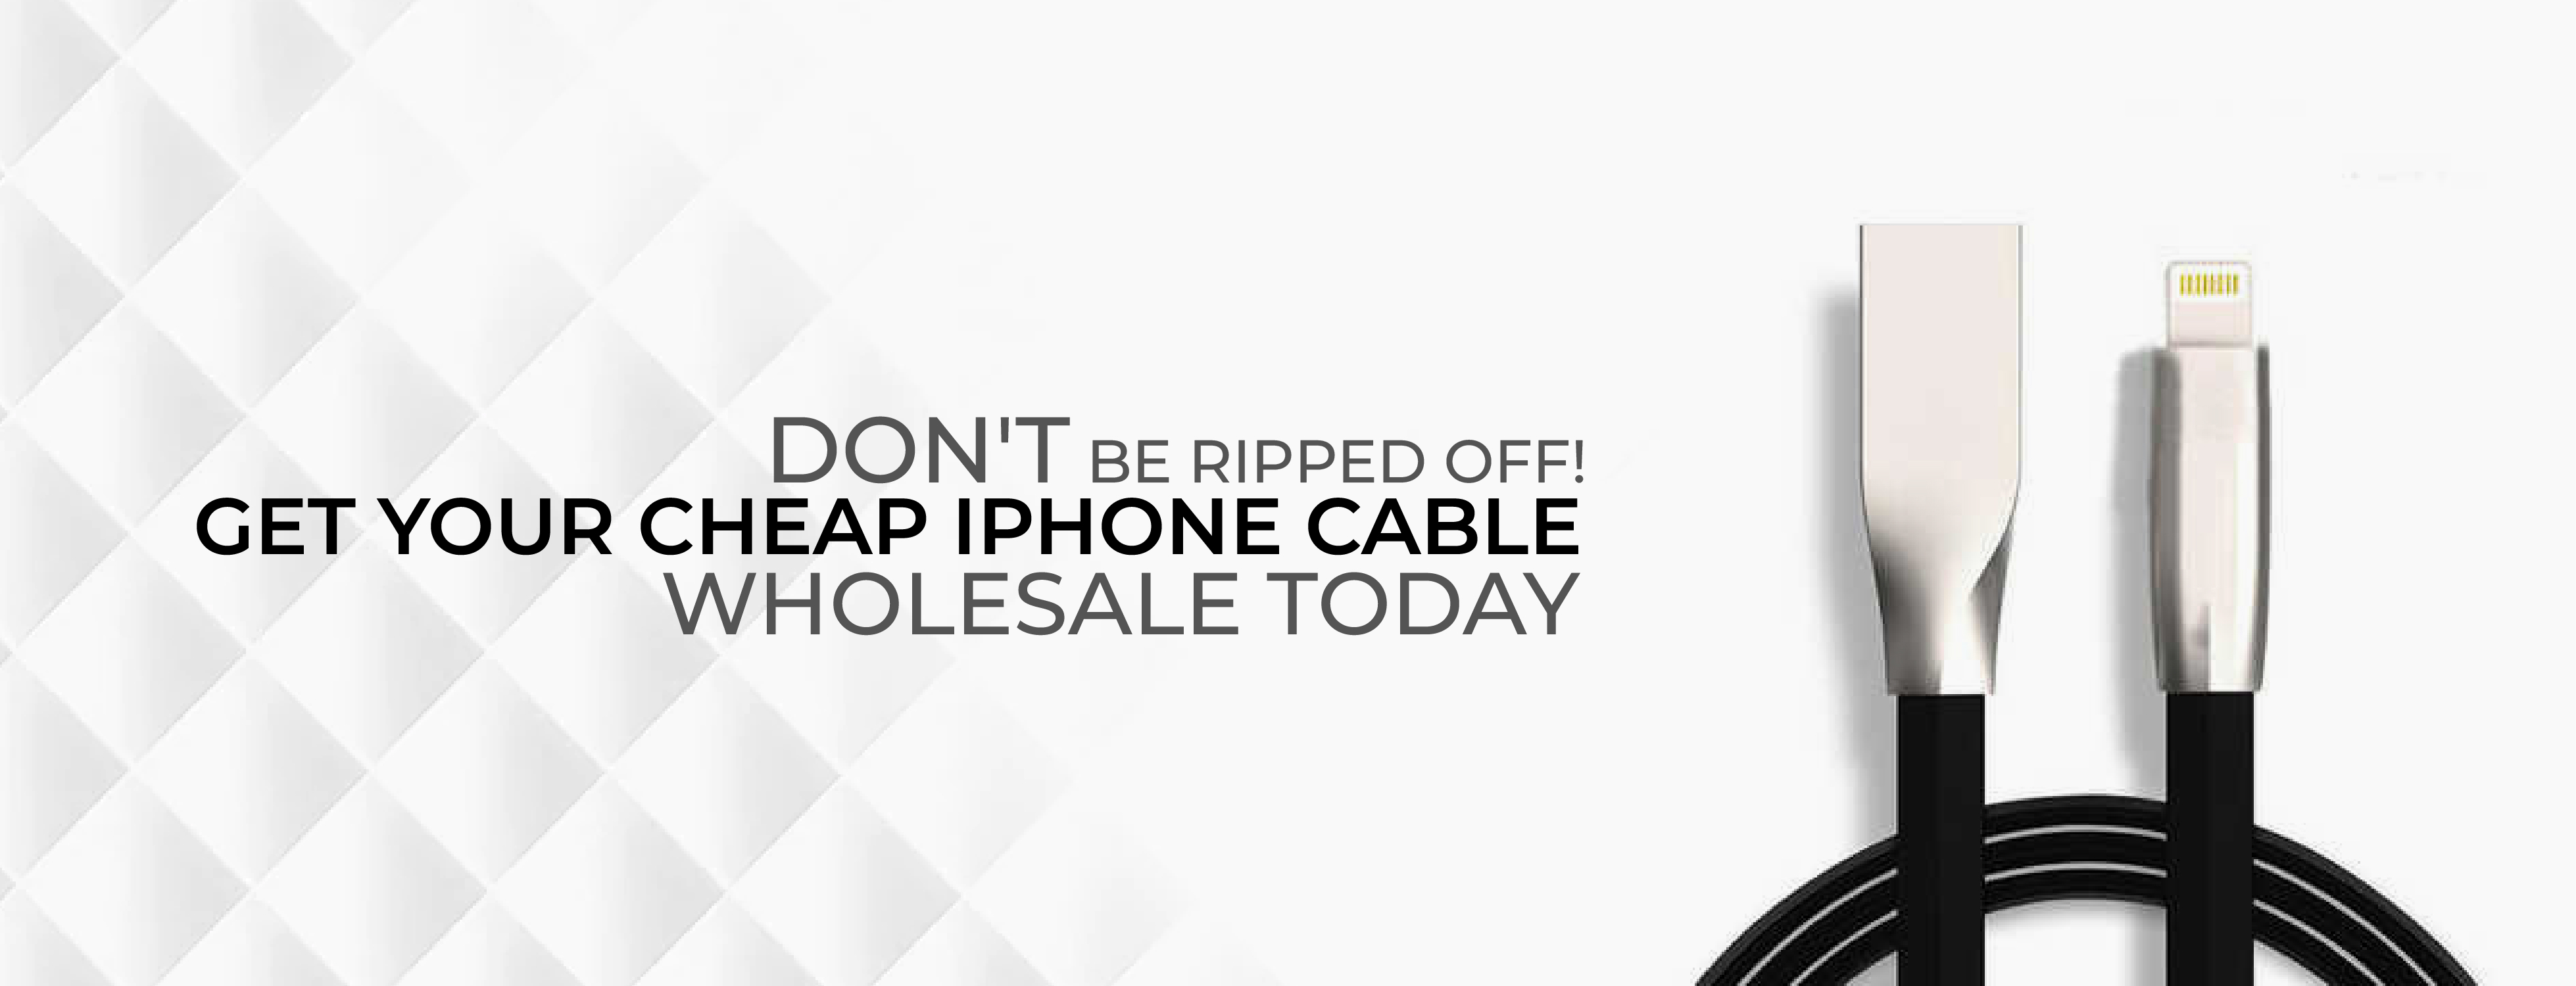 Don't be ripped off! Get your cheap iPhone cable wholesale today